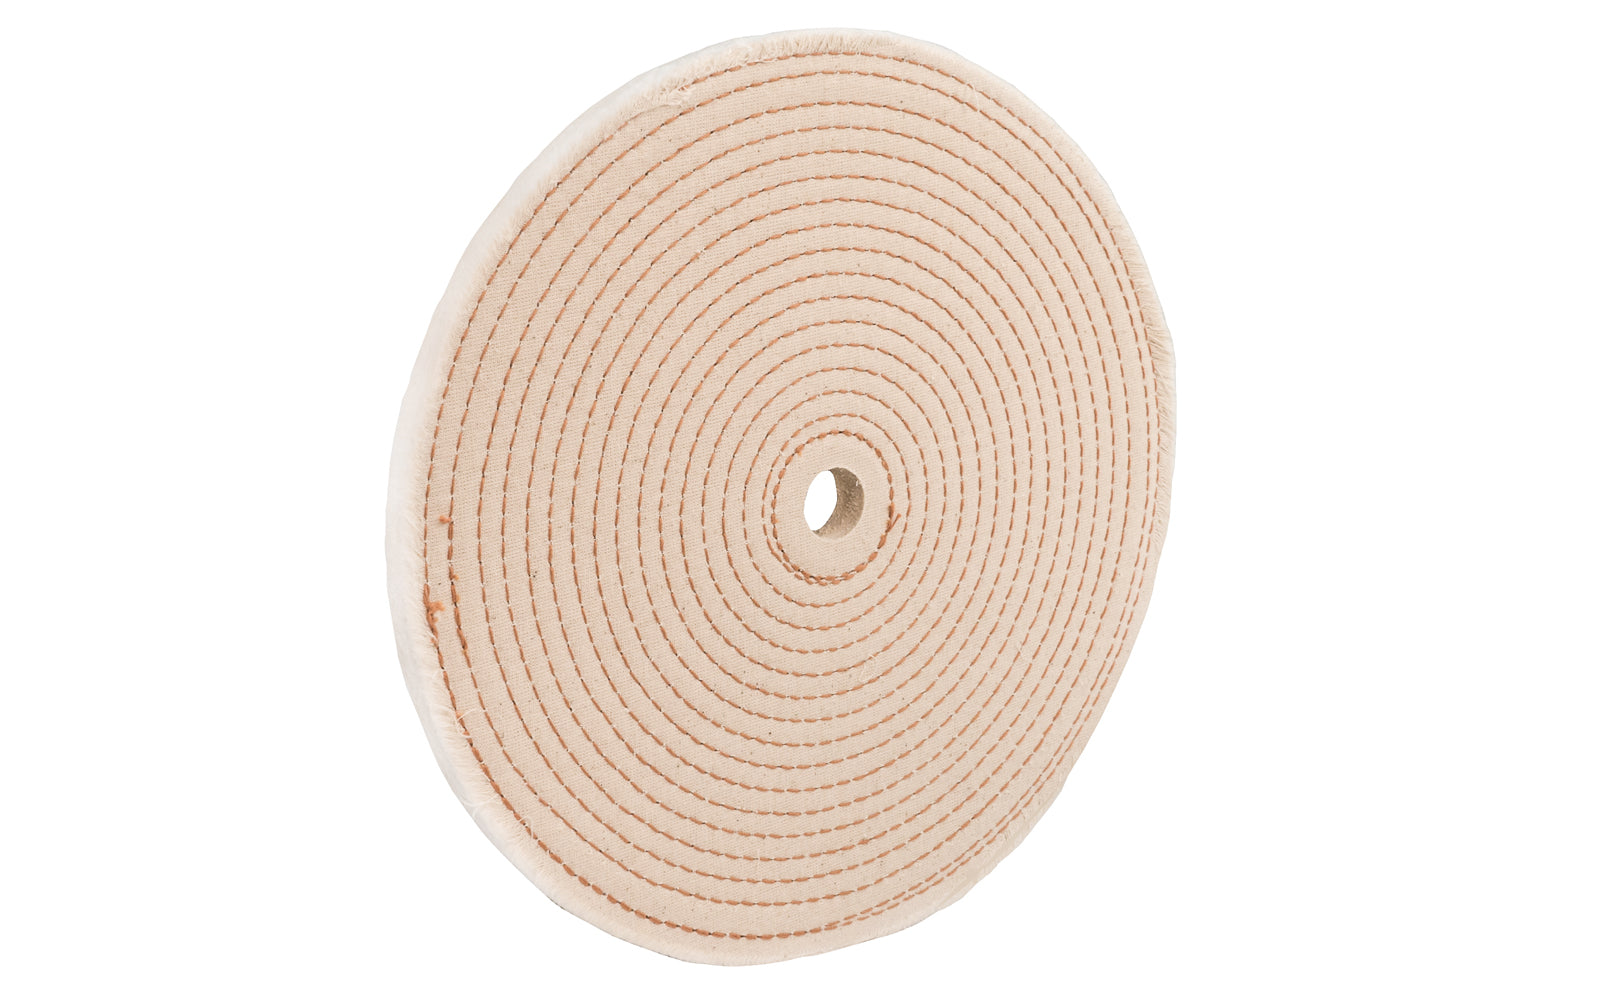 The 10" Spiral Sewn Buffing Wheel ~ 1/2" Thick for aggressive cutting & coarse buffing. 3/4" hole diameter. 1/2" wide thickness. Made in USA. This spiral sewn wheel is designed for prolong service. Good for coarse cutting & buffing, & flexible grinding. Stiffer cotton sheeting - Held together lockstitch sewing. Dico Polishing Company 528-40-10